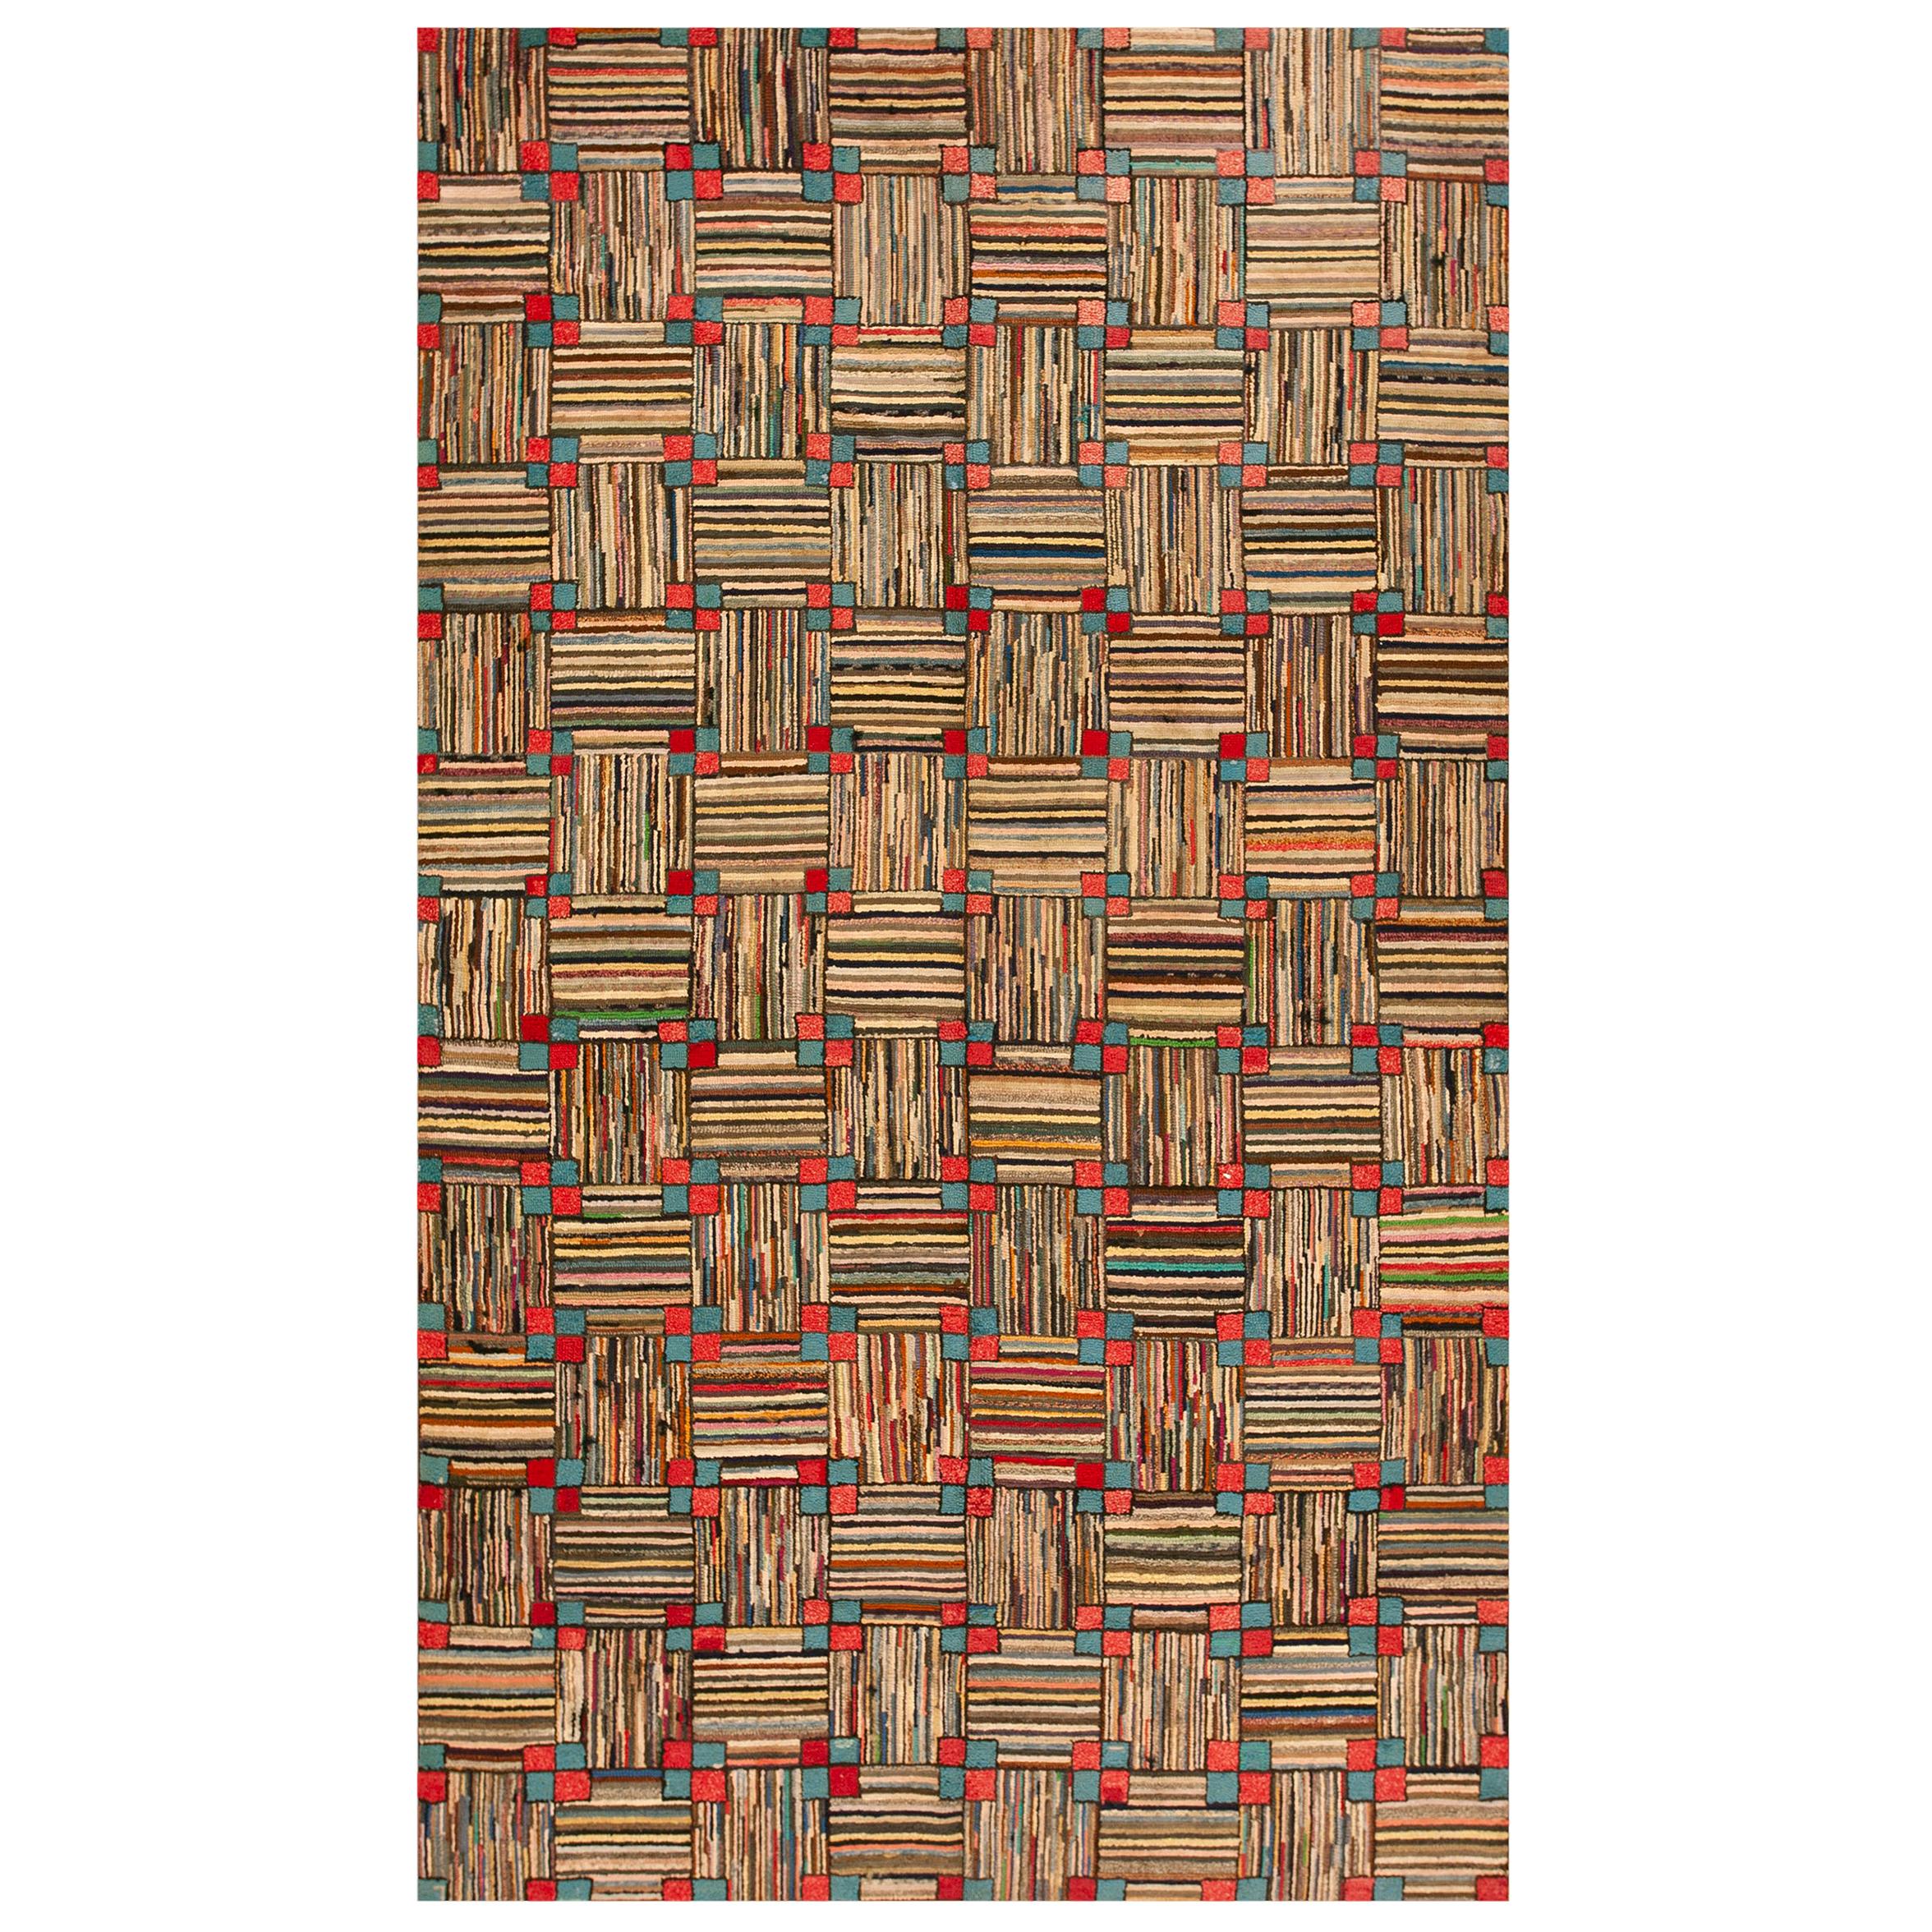 Early 20th Century American Hooked Rug ( 5'10" x 9'8" - 178 x 295 ) For Sale